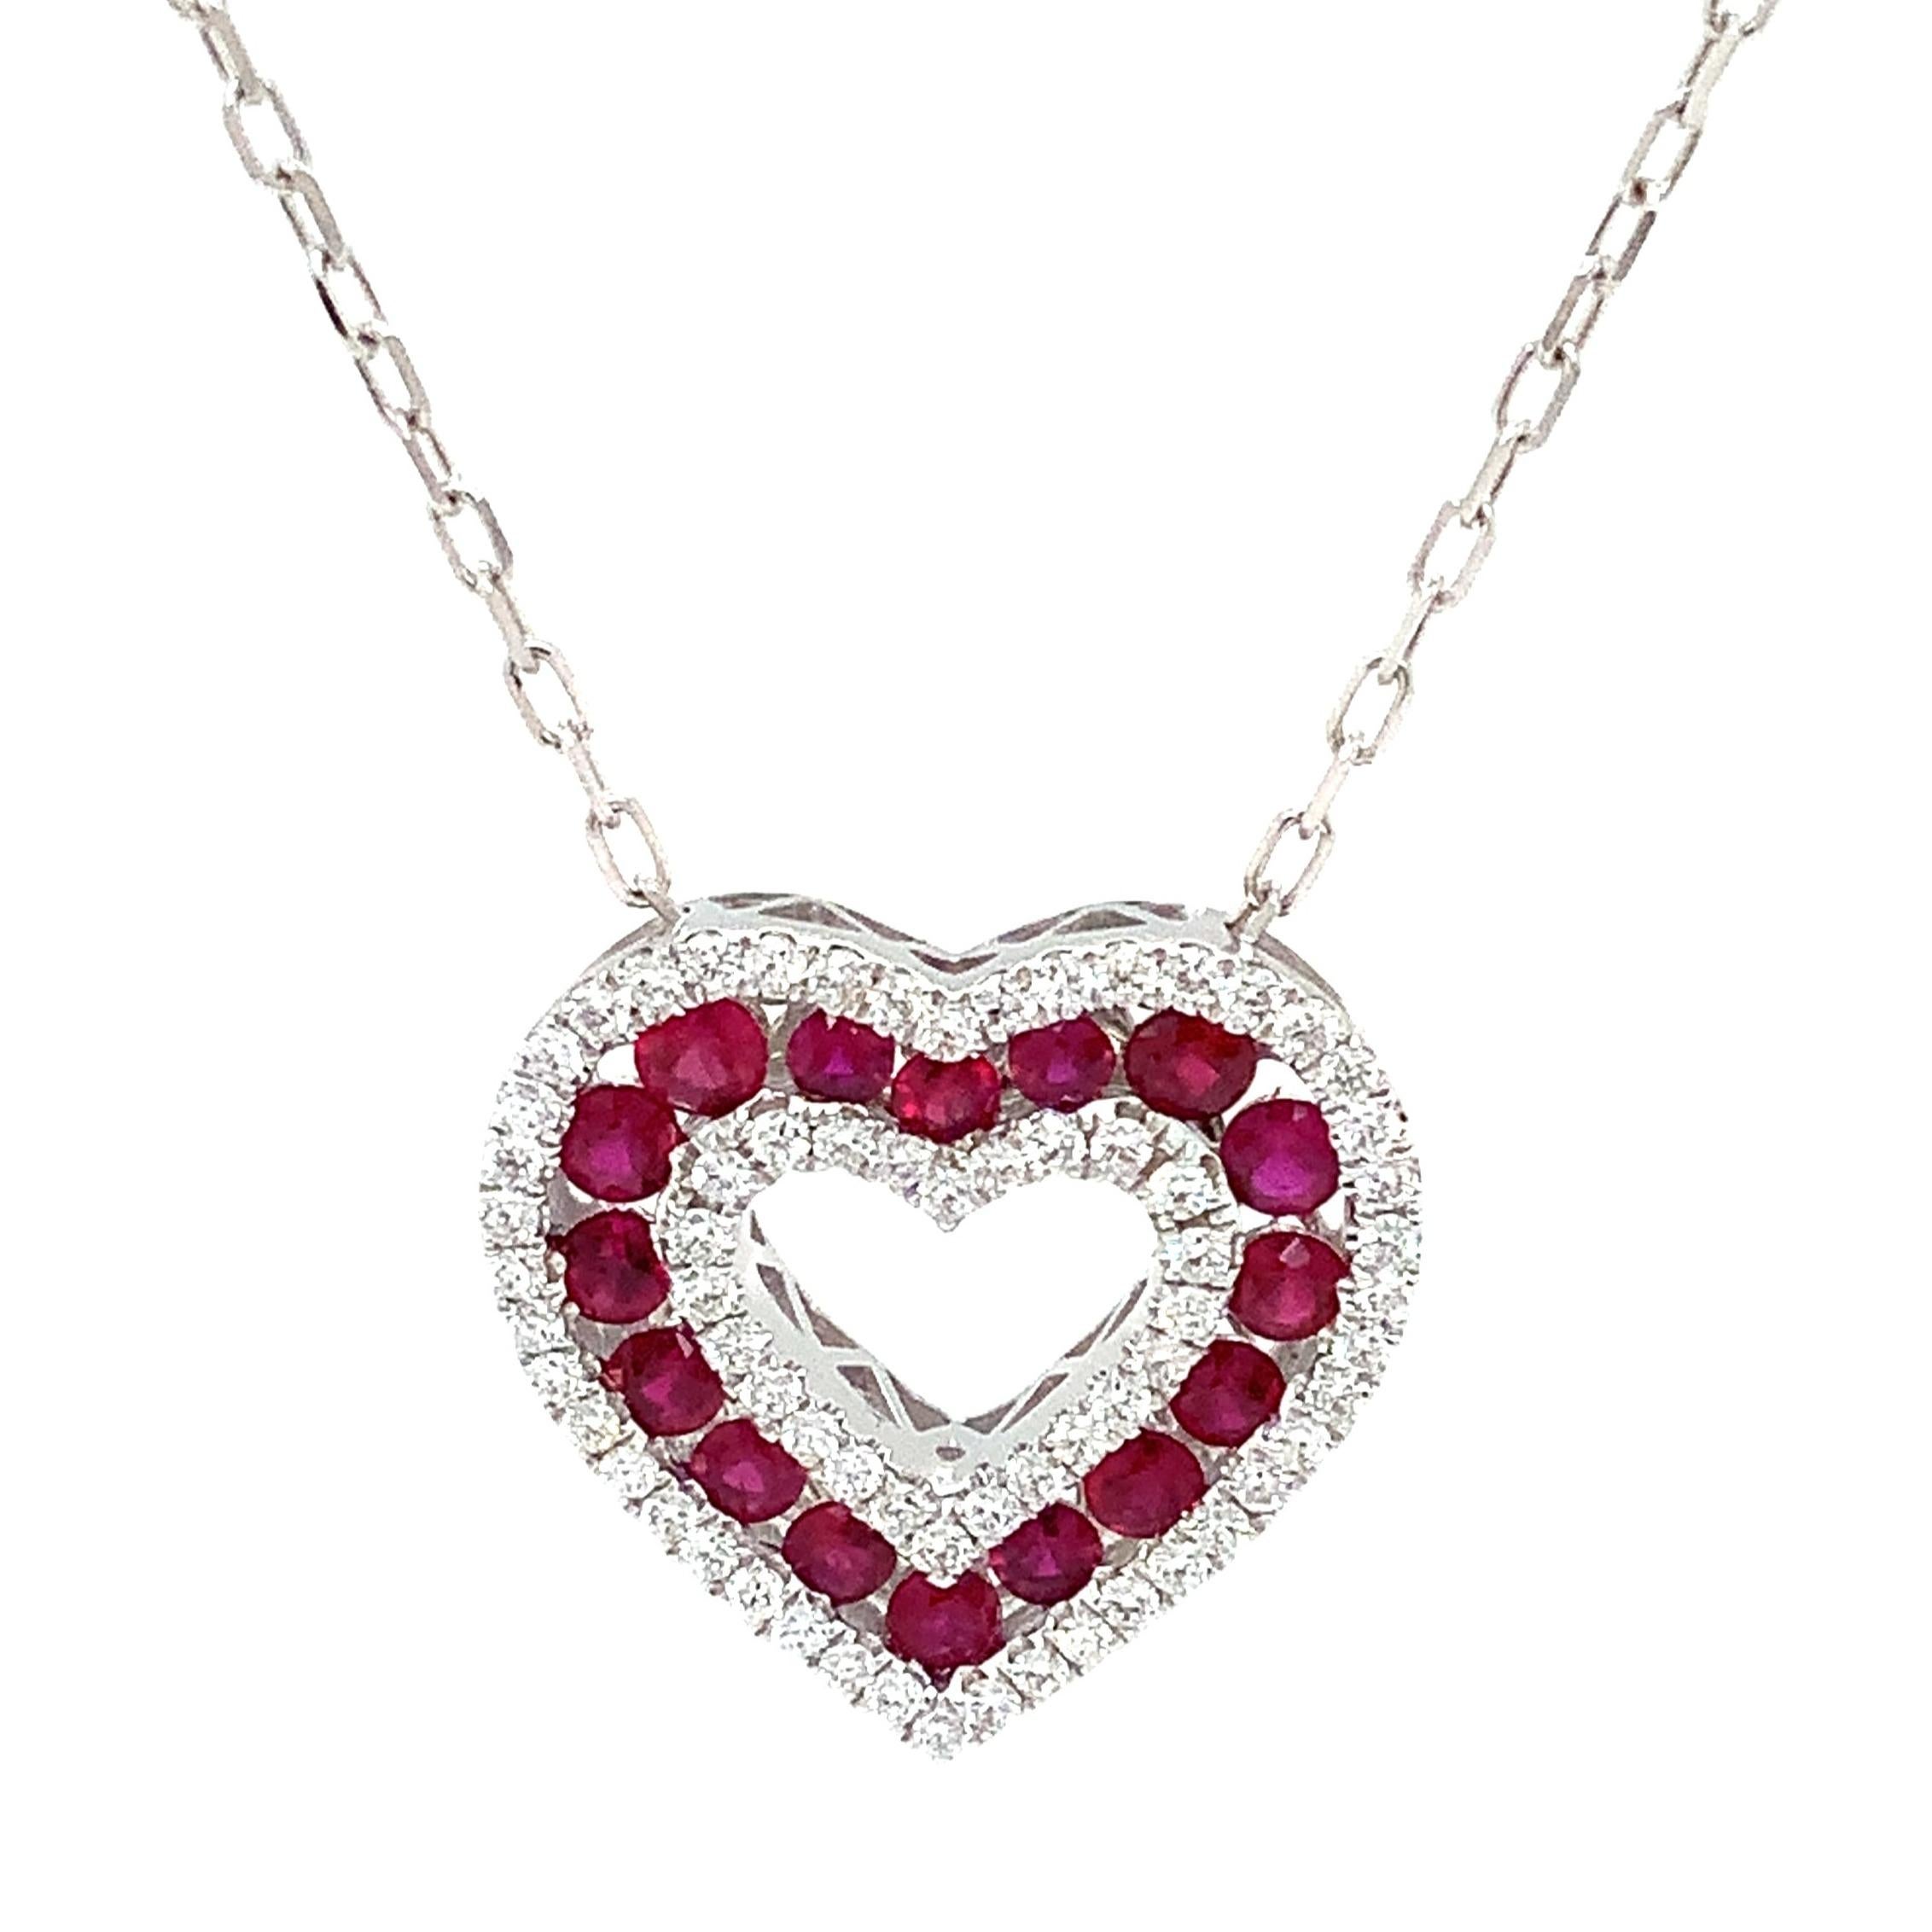 Afarin Collection Classic 3 Row African Ruby and Diamond Heart Shape Necklace Set in 18K White Gold. This is a beautiful and modern twist on the classic heart pendant.
16 Round Rubies =0.80 cts t.w.
 68 Round Brilliant Cut Diamond =0.33 cts t.w.
18